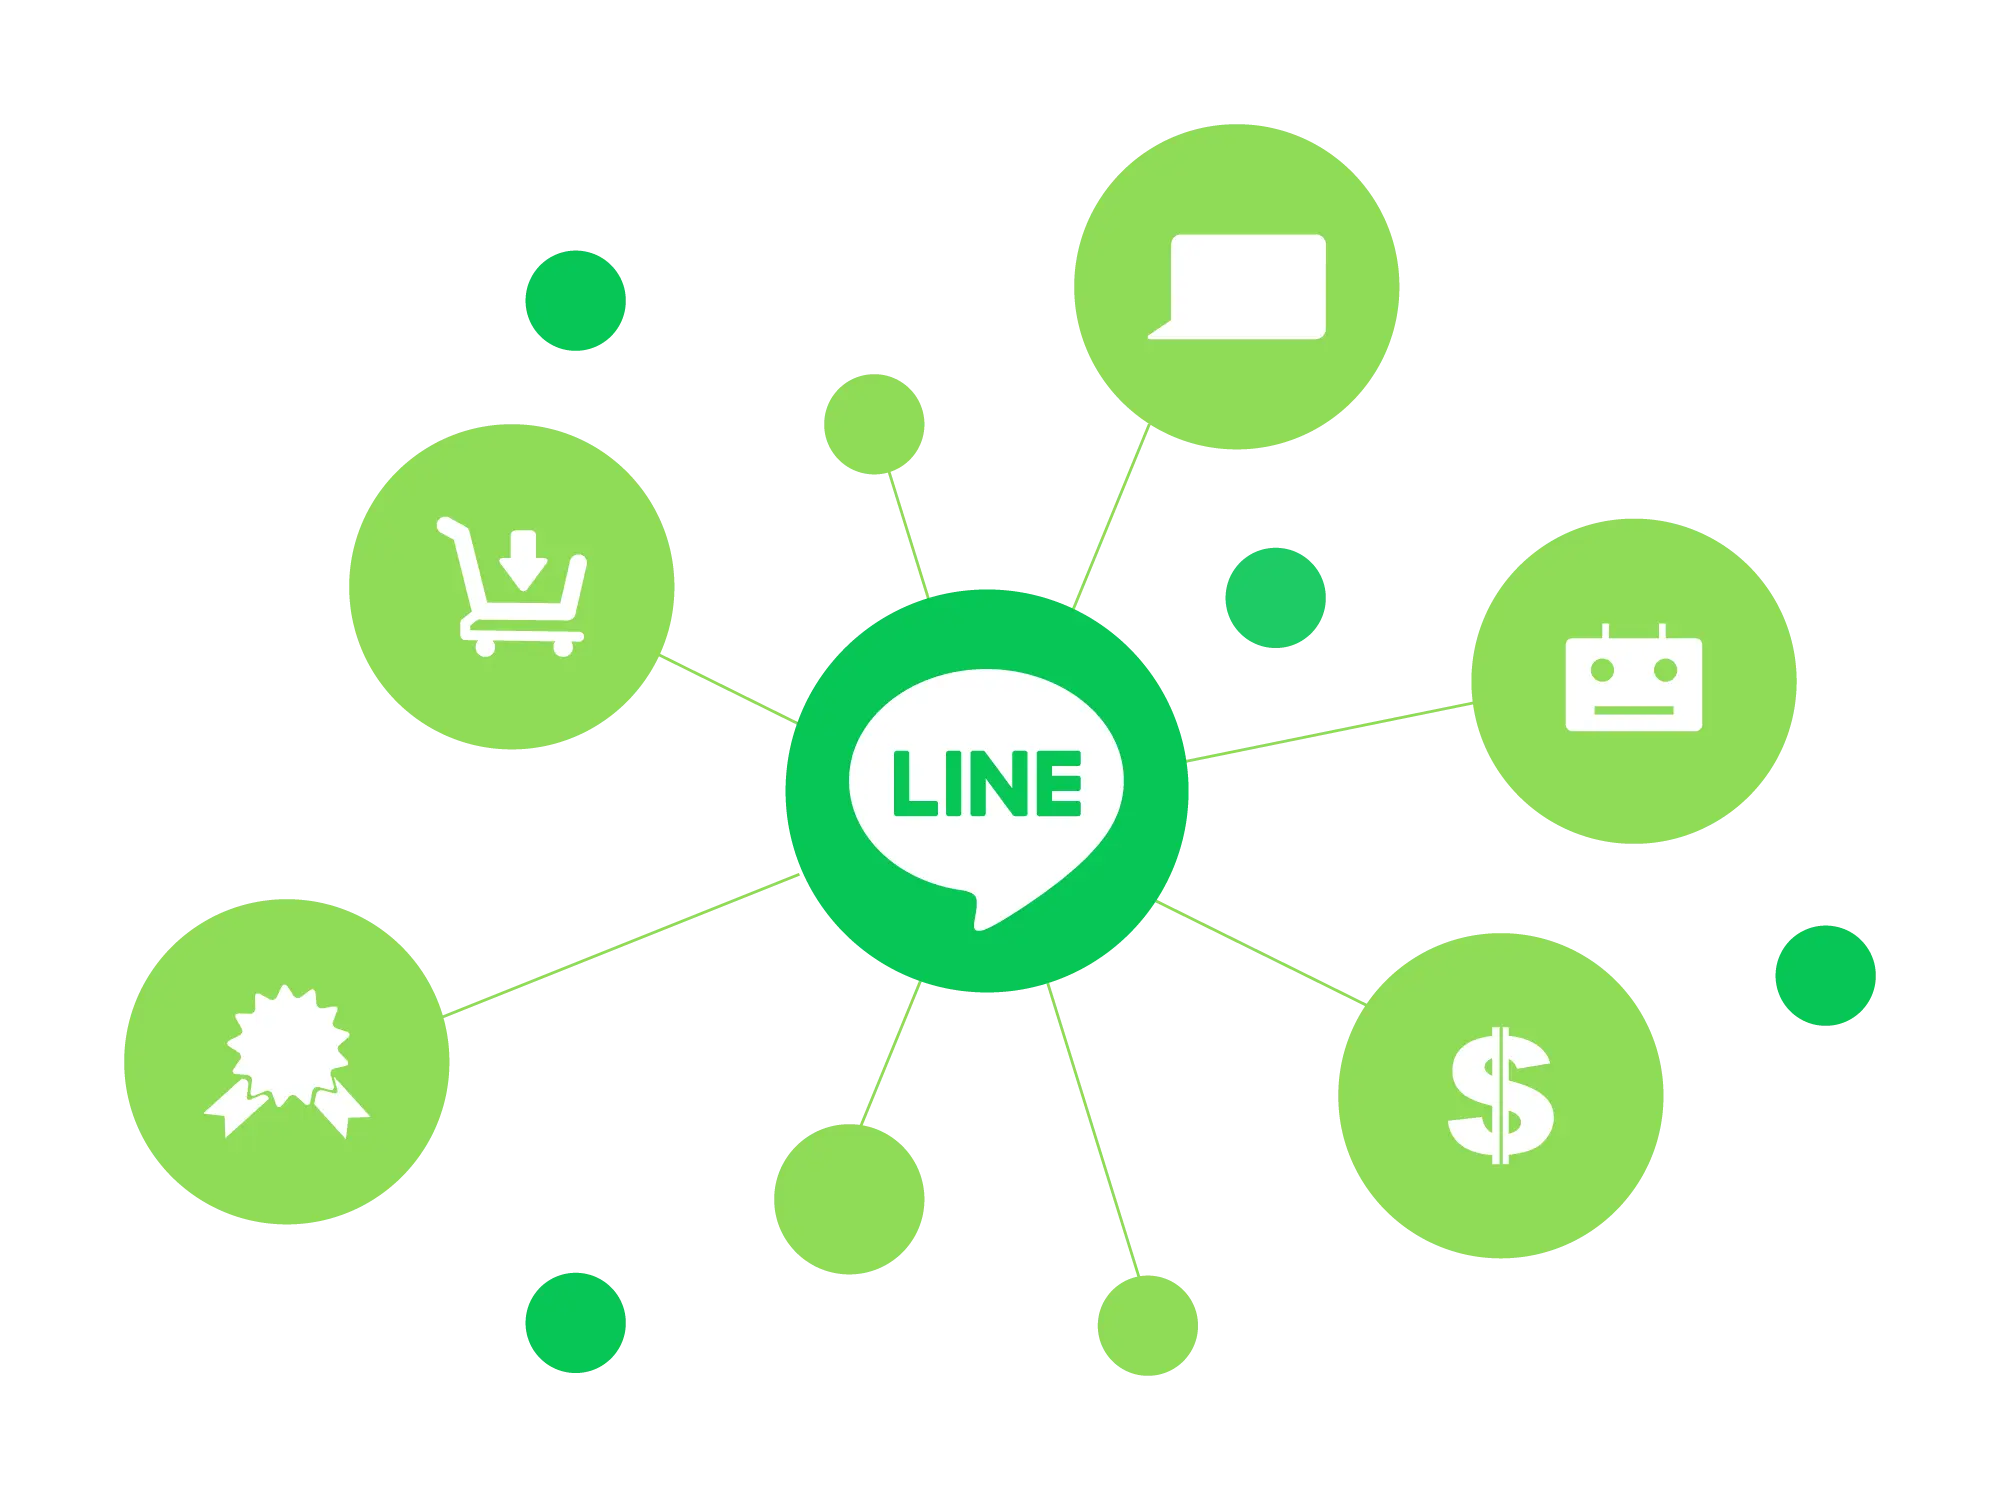 Symbols illustrating LINE's rich ecosystem and branches of products